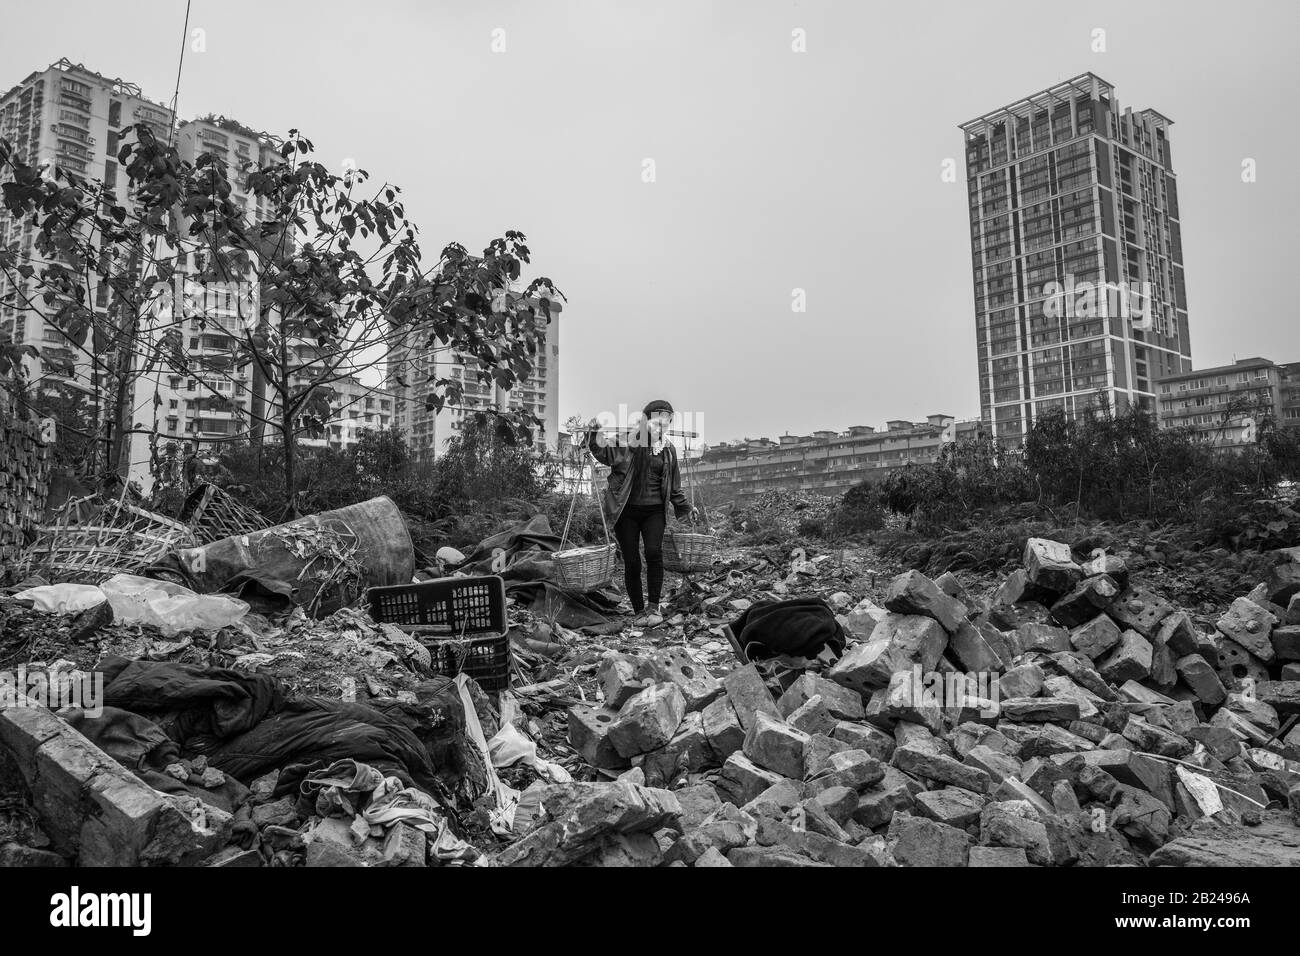 Street scene in an old town quarter of Chongqing. A woman recovering building materials from a demolition house, Chongqing, China Stock Photo